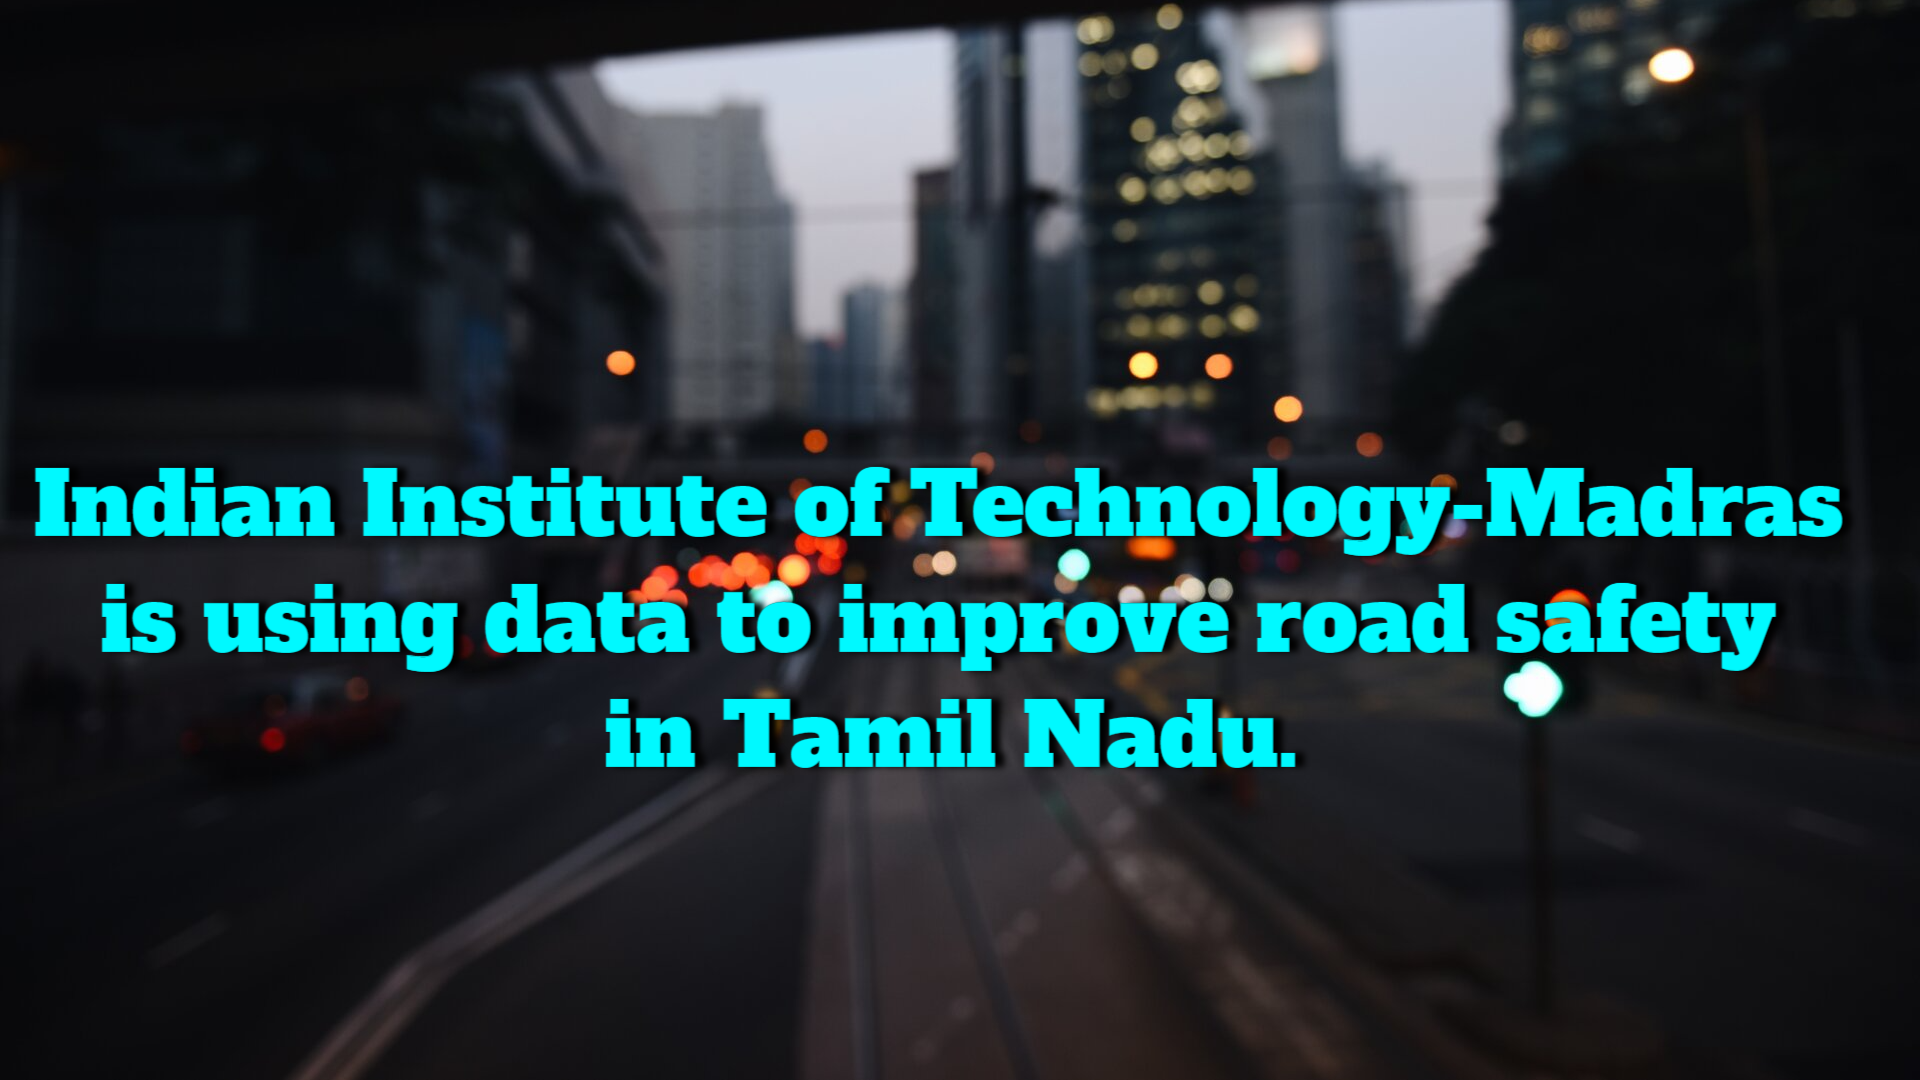 IIT-M researchers are using data-driven solutions to improve traffic safety in Tamil Nadu.